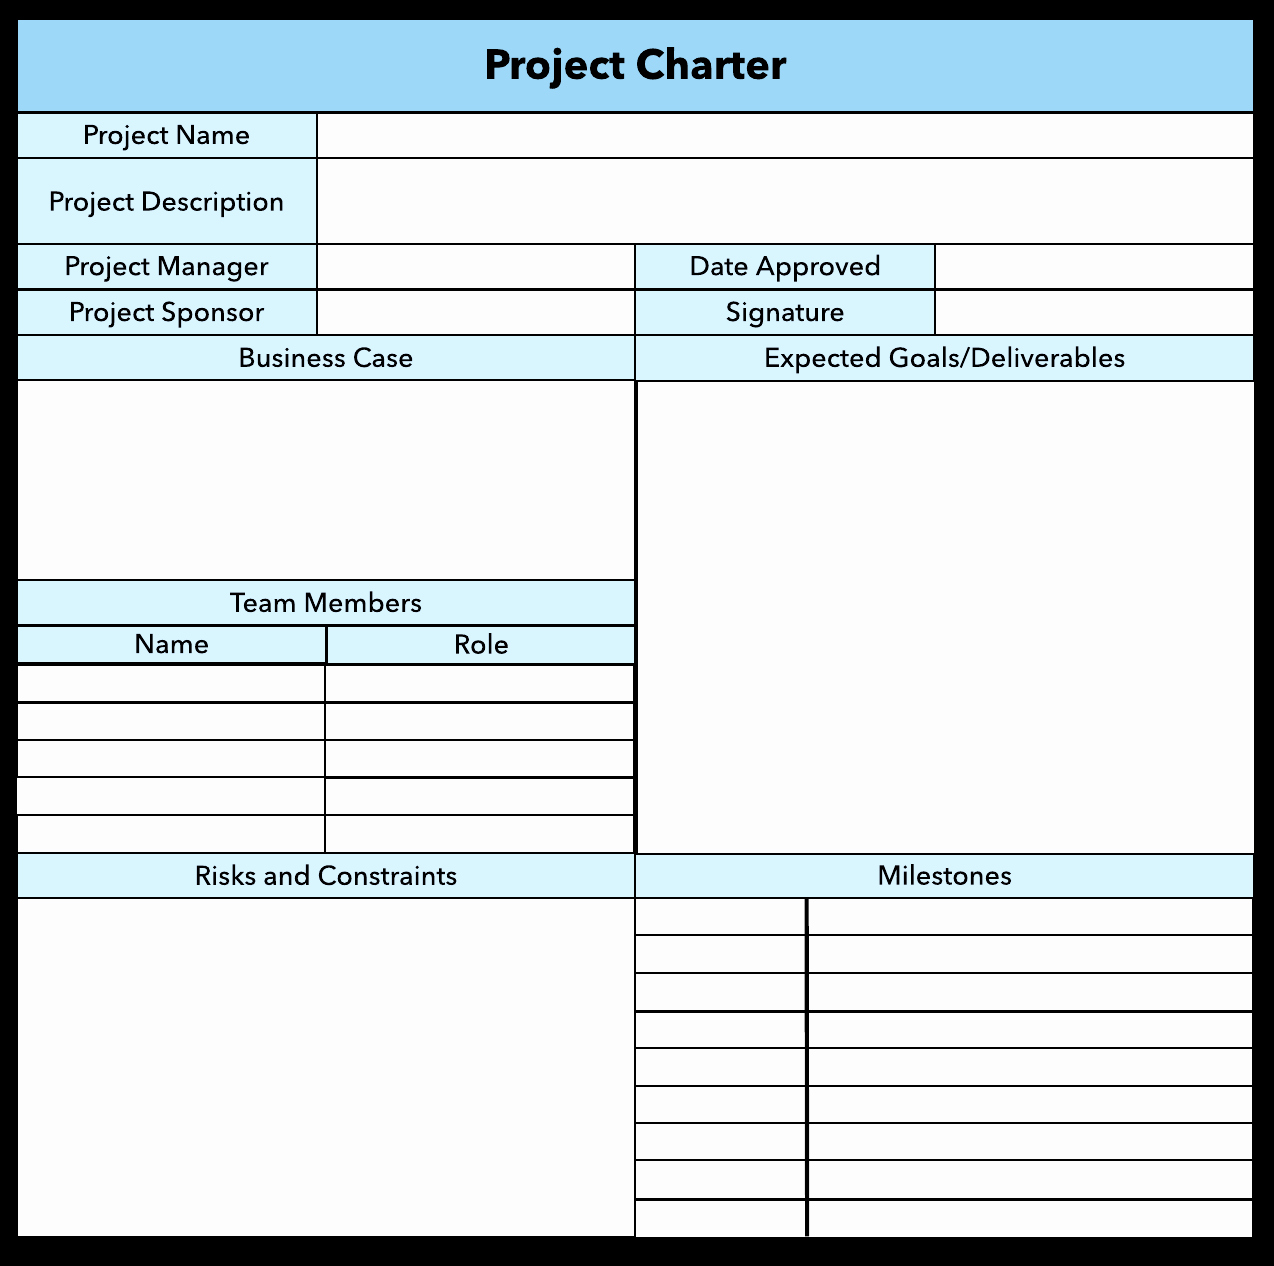 Company Charter Template New How to Write A Winning Project Charter